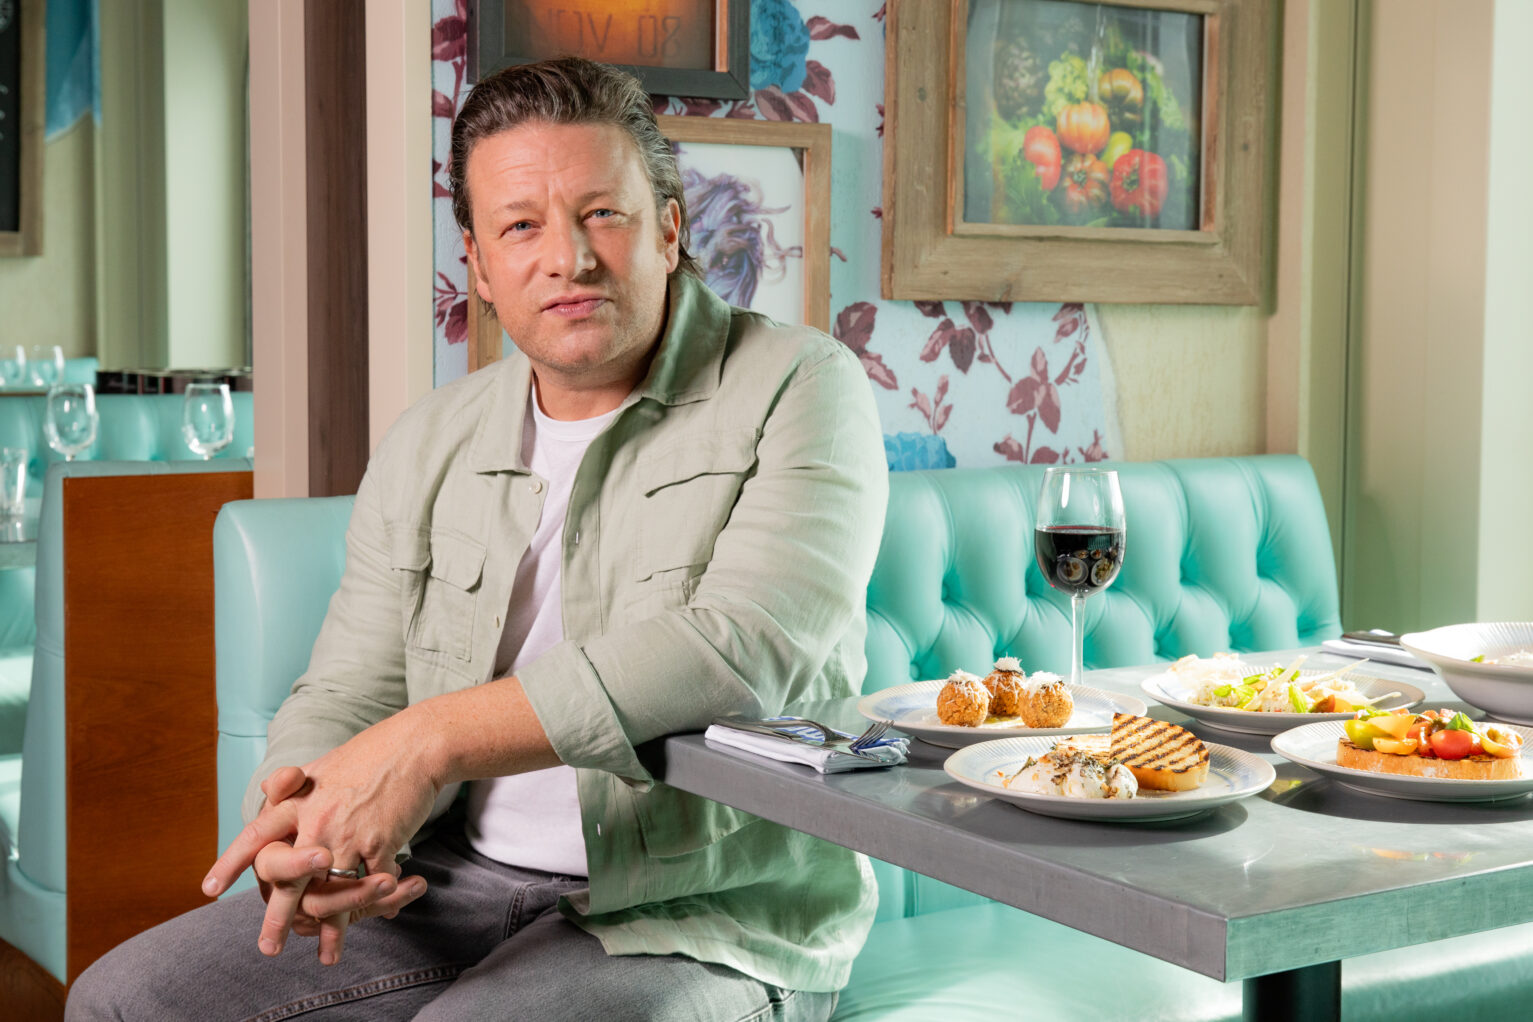 Jamie Oliver onboard Ovation of the Seas in Sydney.